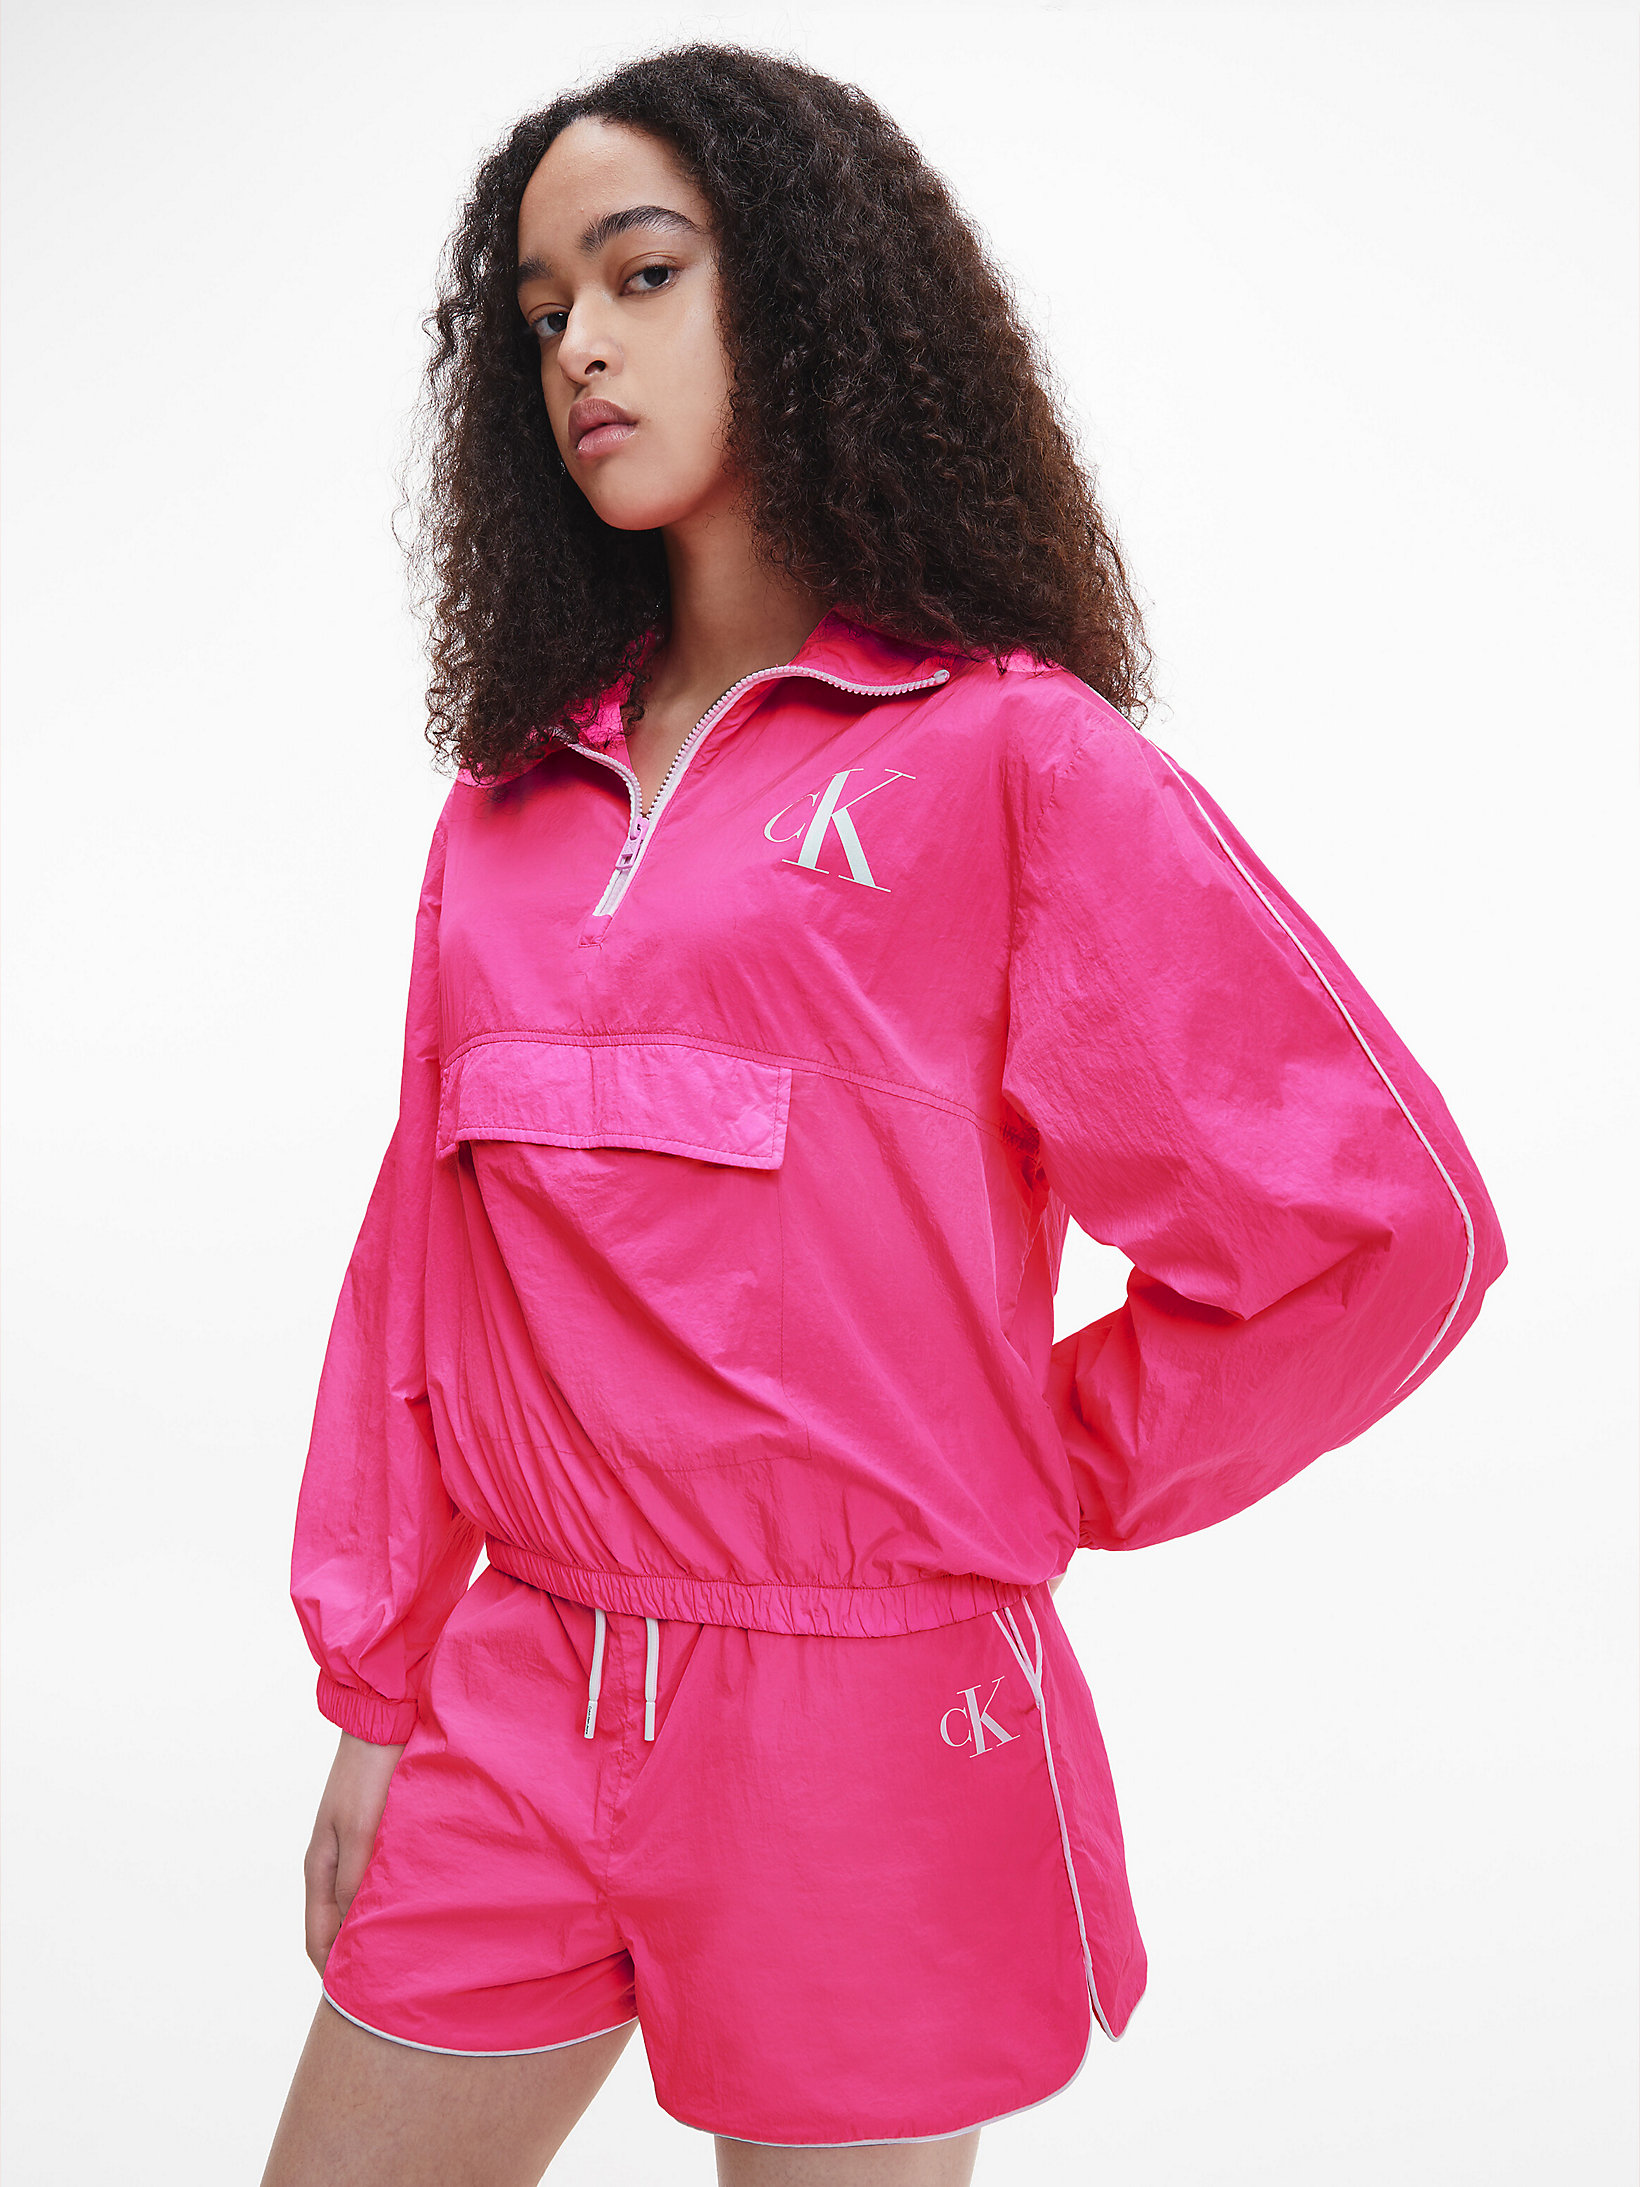 Giacca A Vento In Nylon Taglio Relaxed > Neon Pink > undefined donna > Calvin Klein